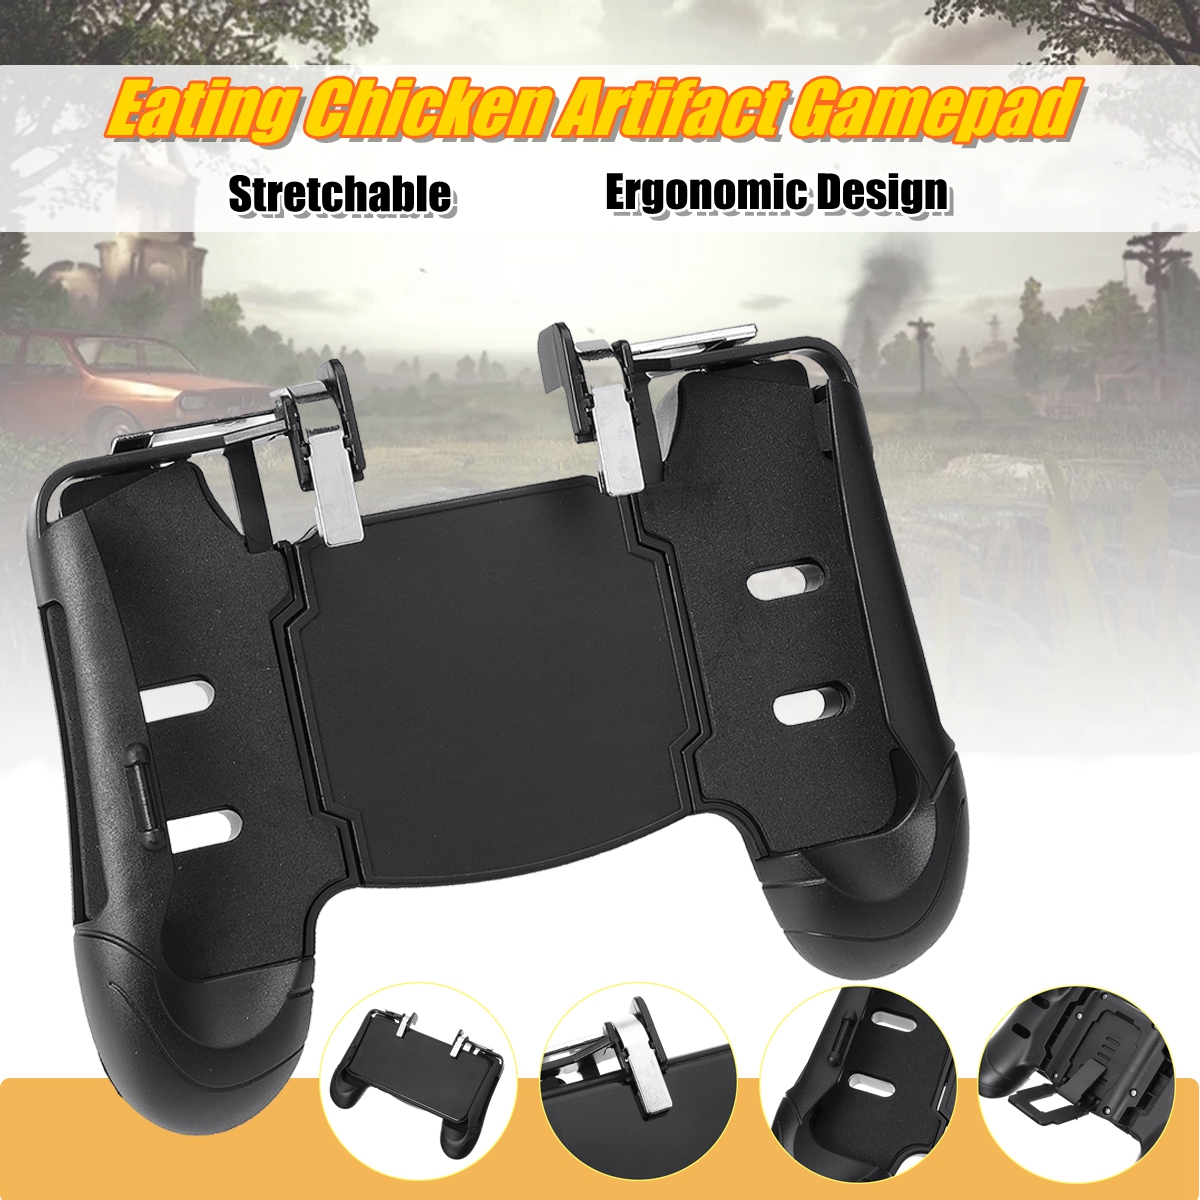 Mobile-Phone-Game-Controller-Joystick-Gamepad-for-Android--IOS-Game-Handle-1806256-3